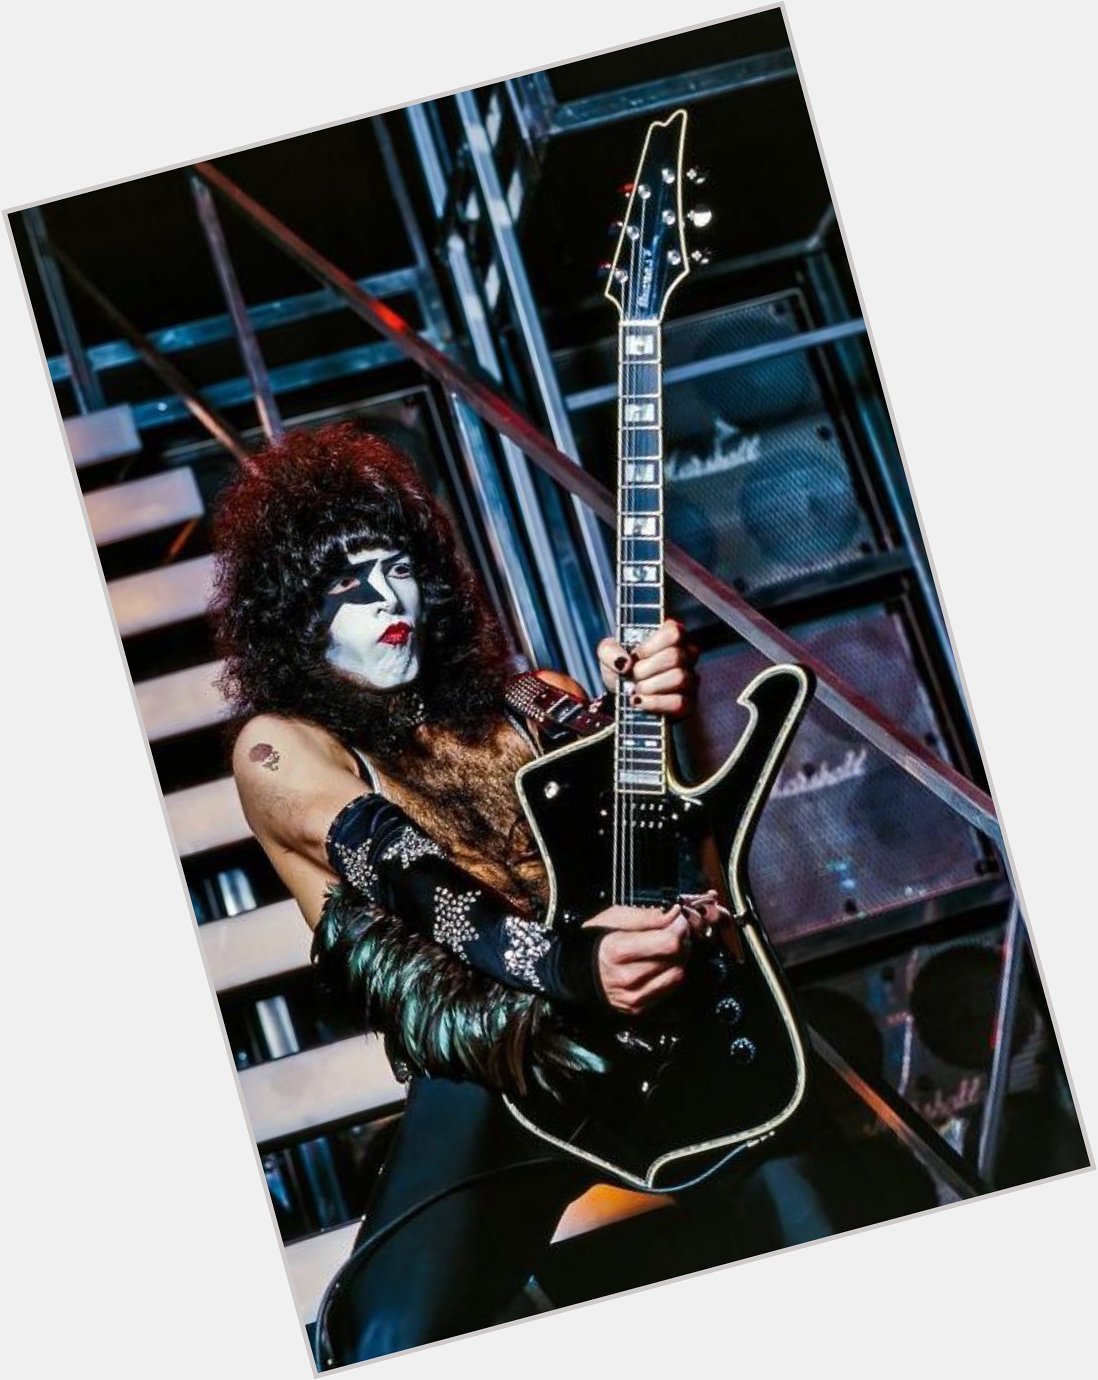 Happy 71st birthday to the one-and-only Paul Stanley, who was born on this day in 1952. 